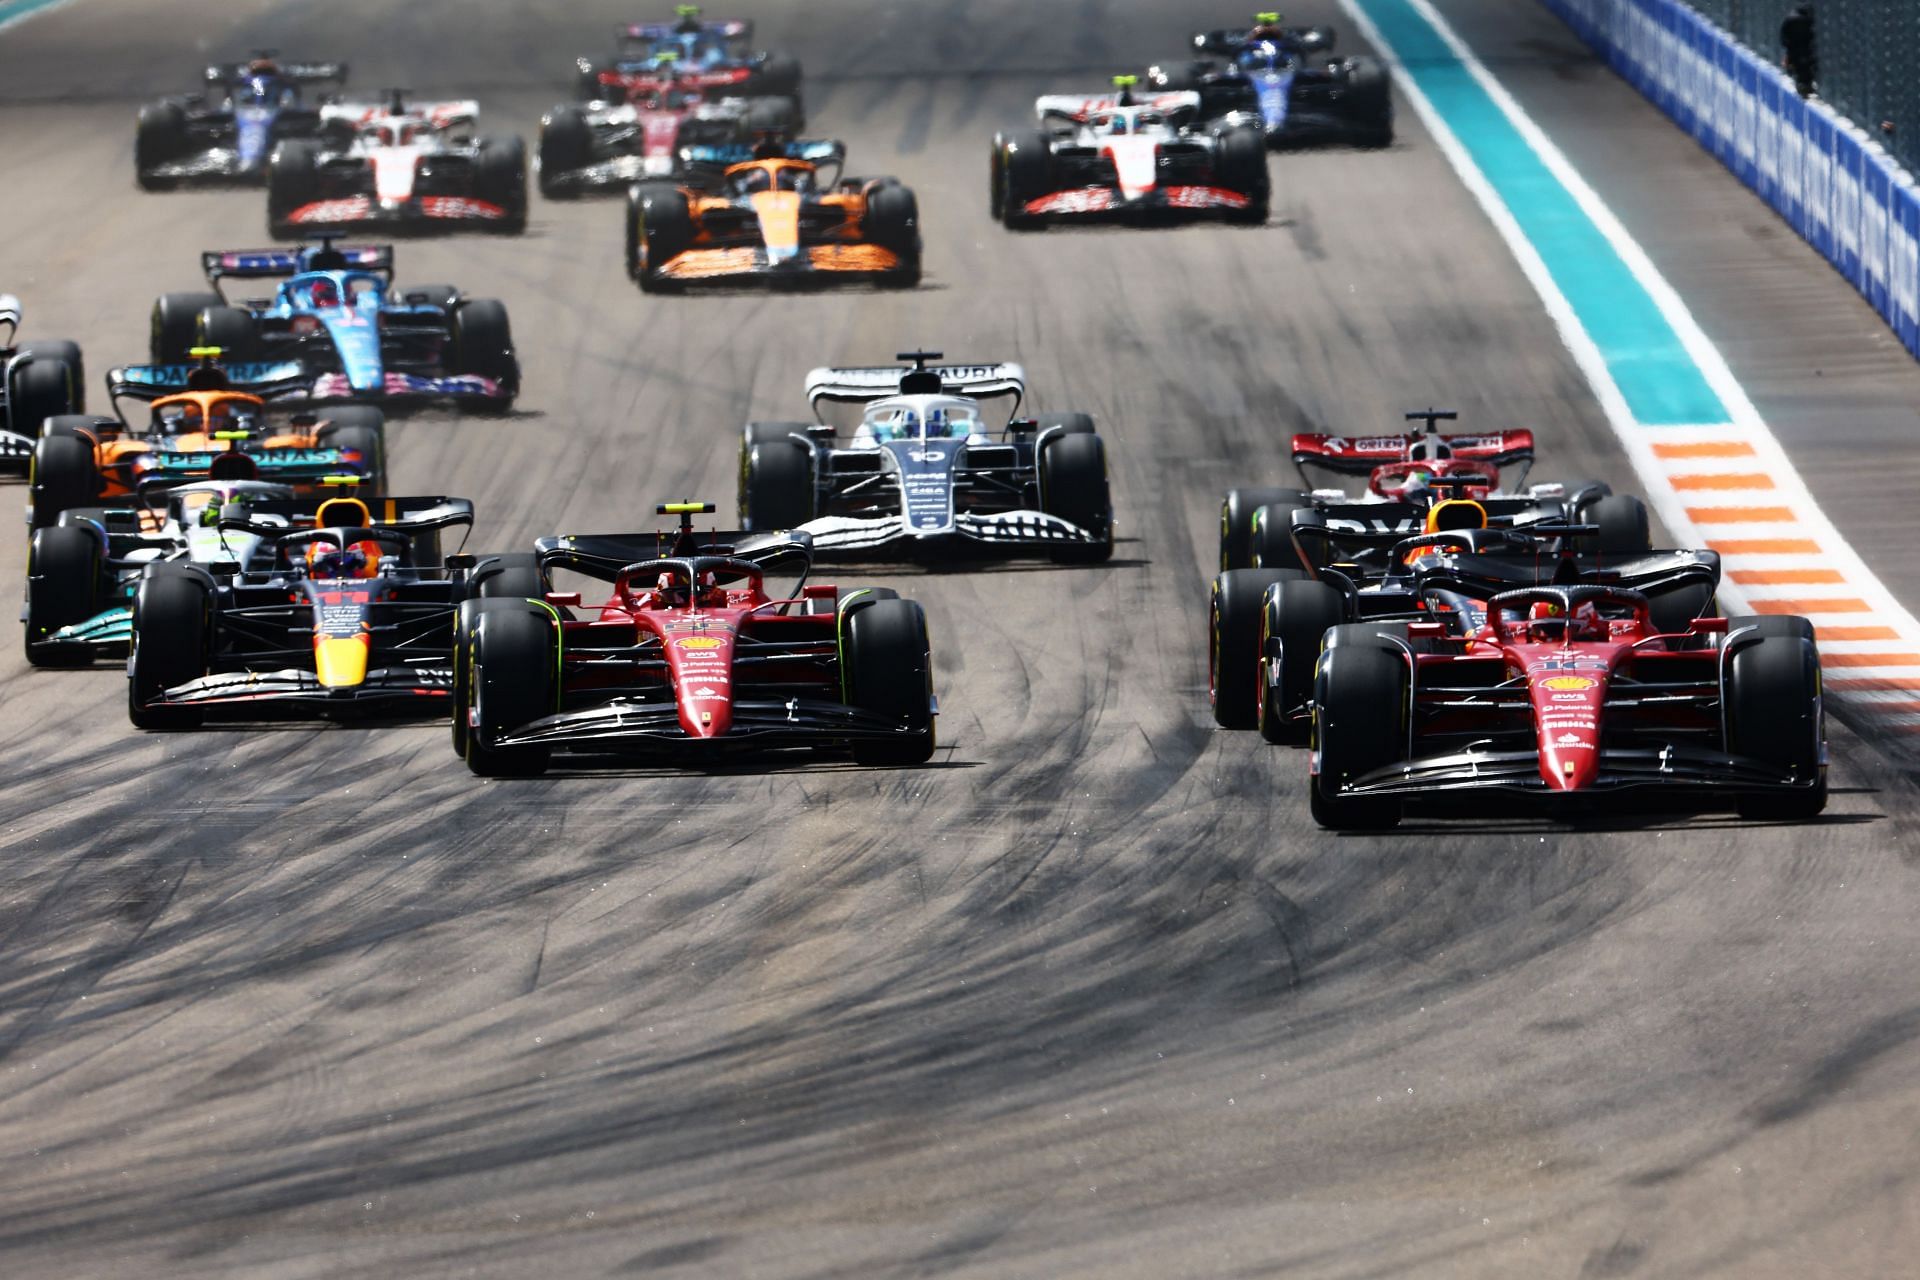 The Miami GP needs some tweaks to make the race a better spectacle